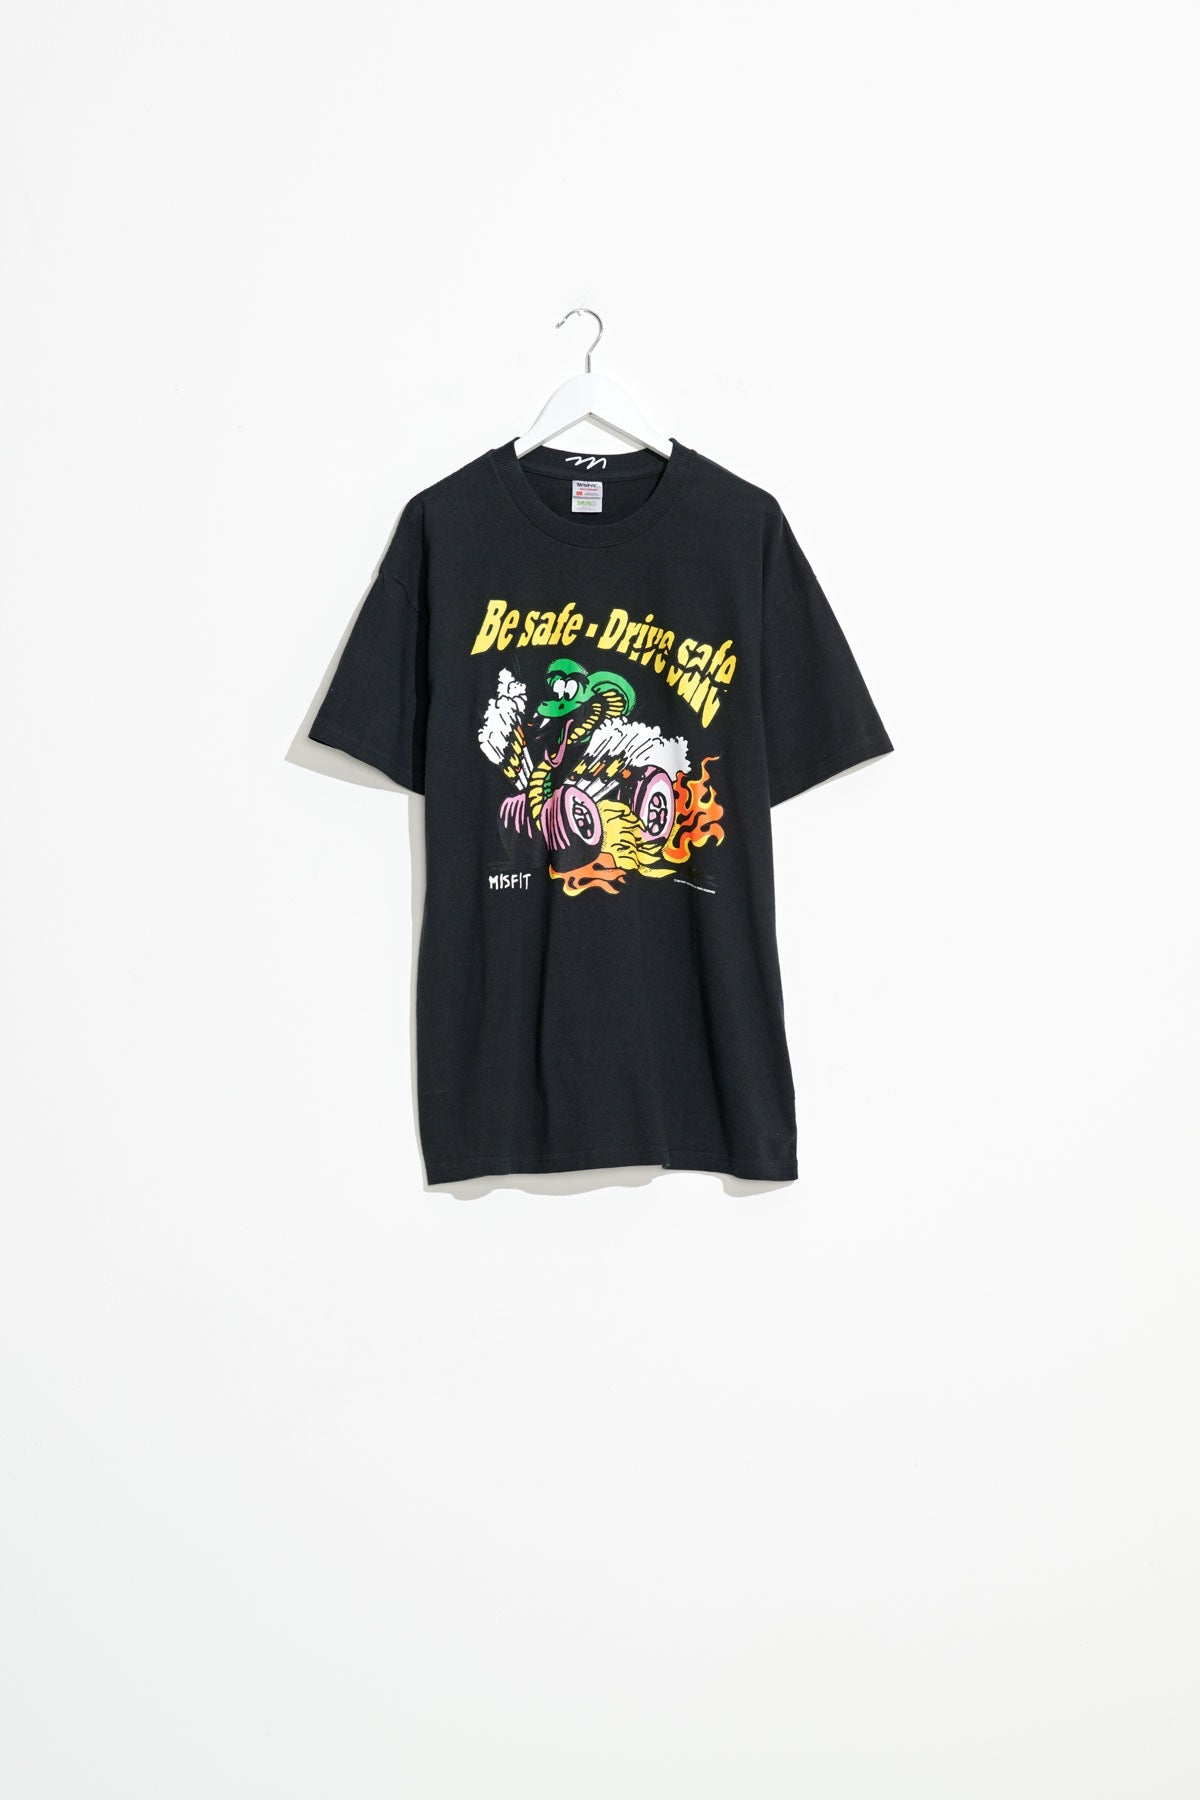 Misfit Shapes - Journey Well 50-50 Aaa SS Tee - Pigment Black